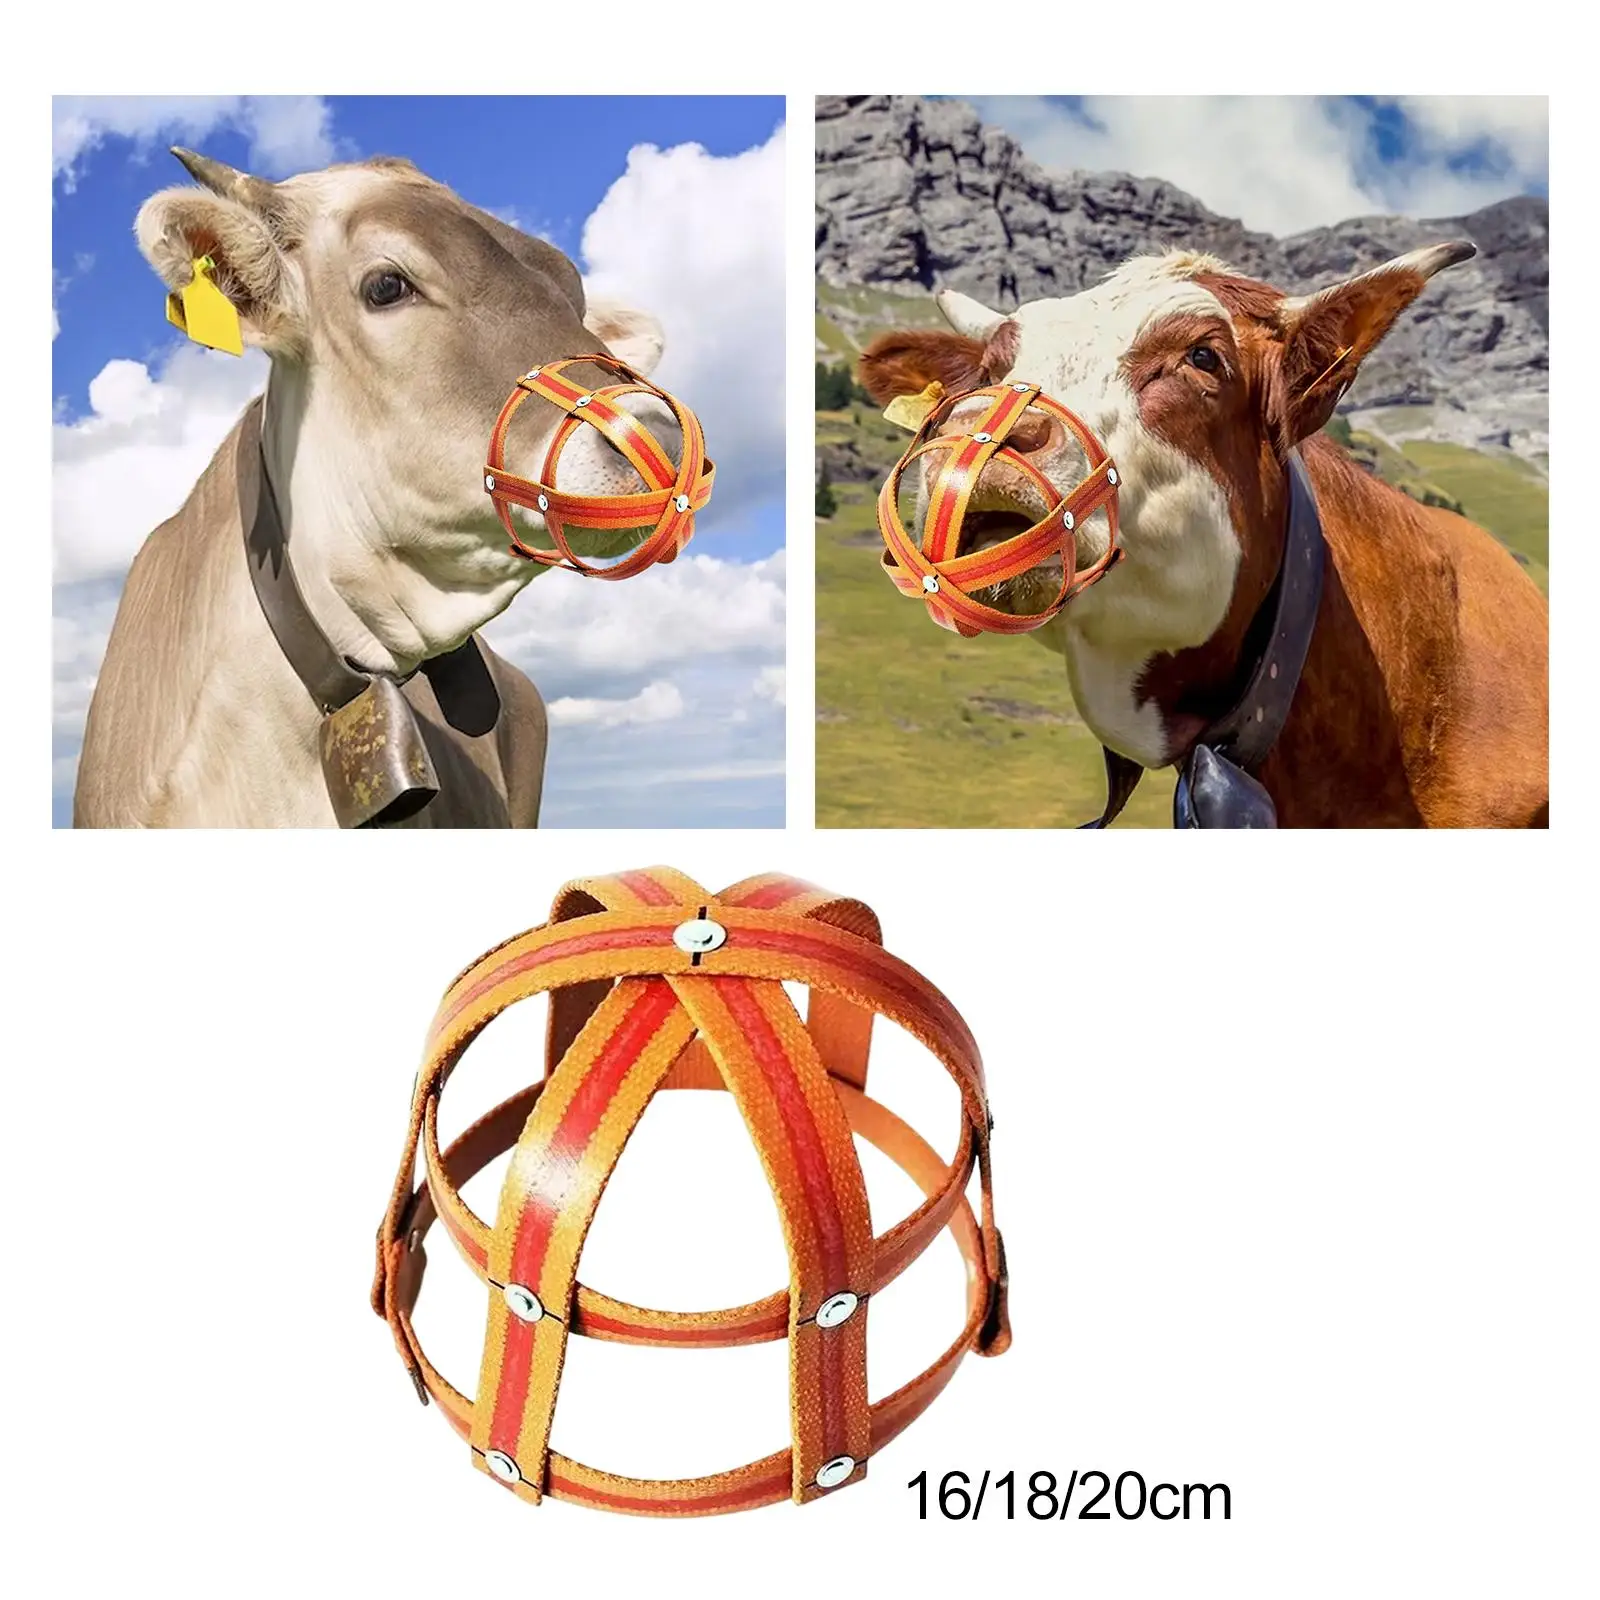 Horse Grazing Muzzle Anti Biting Equestrian Equipment for Sow Horse